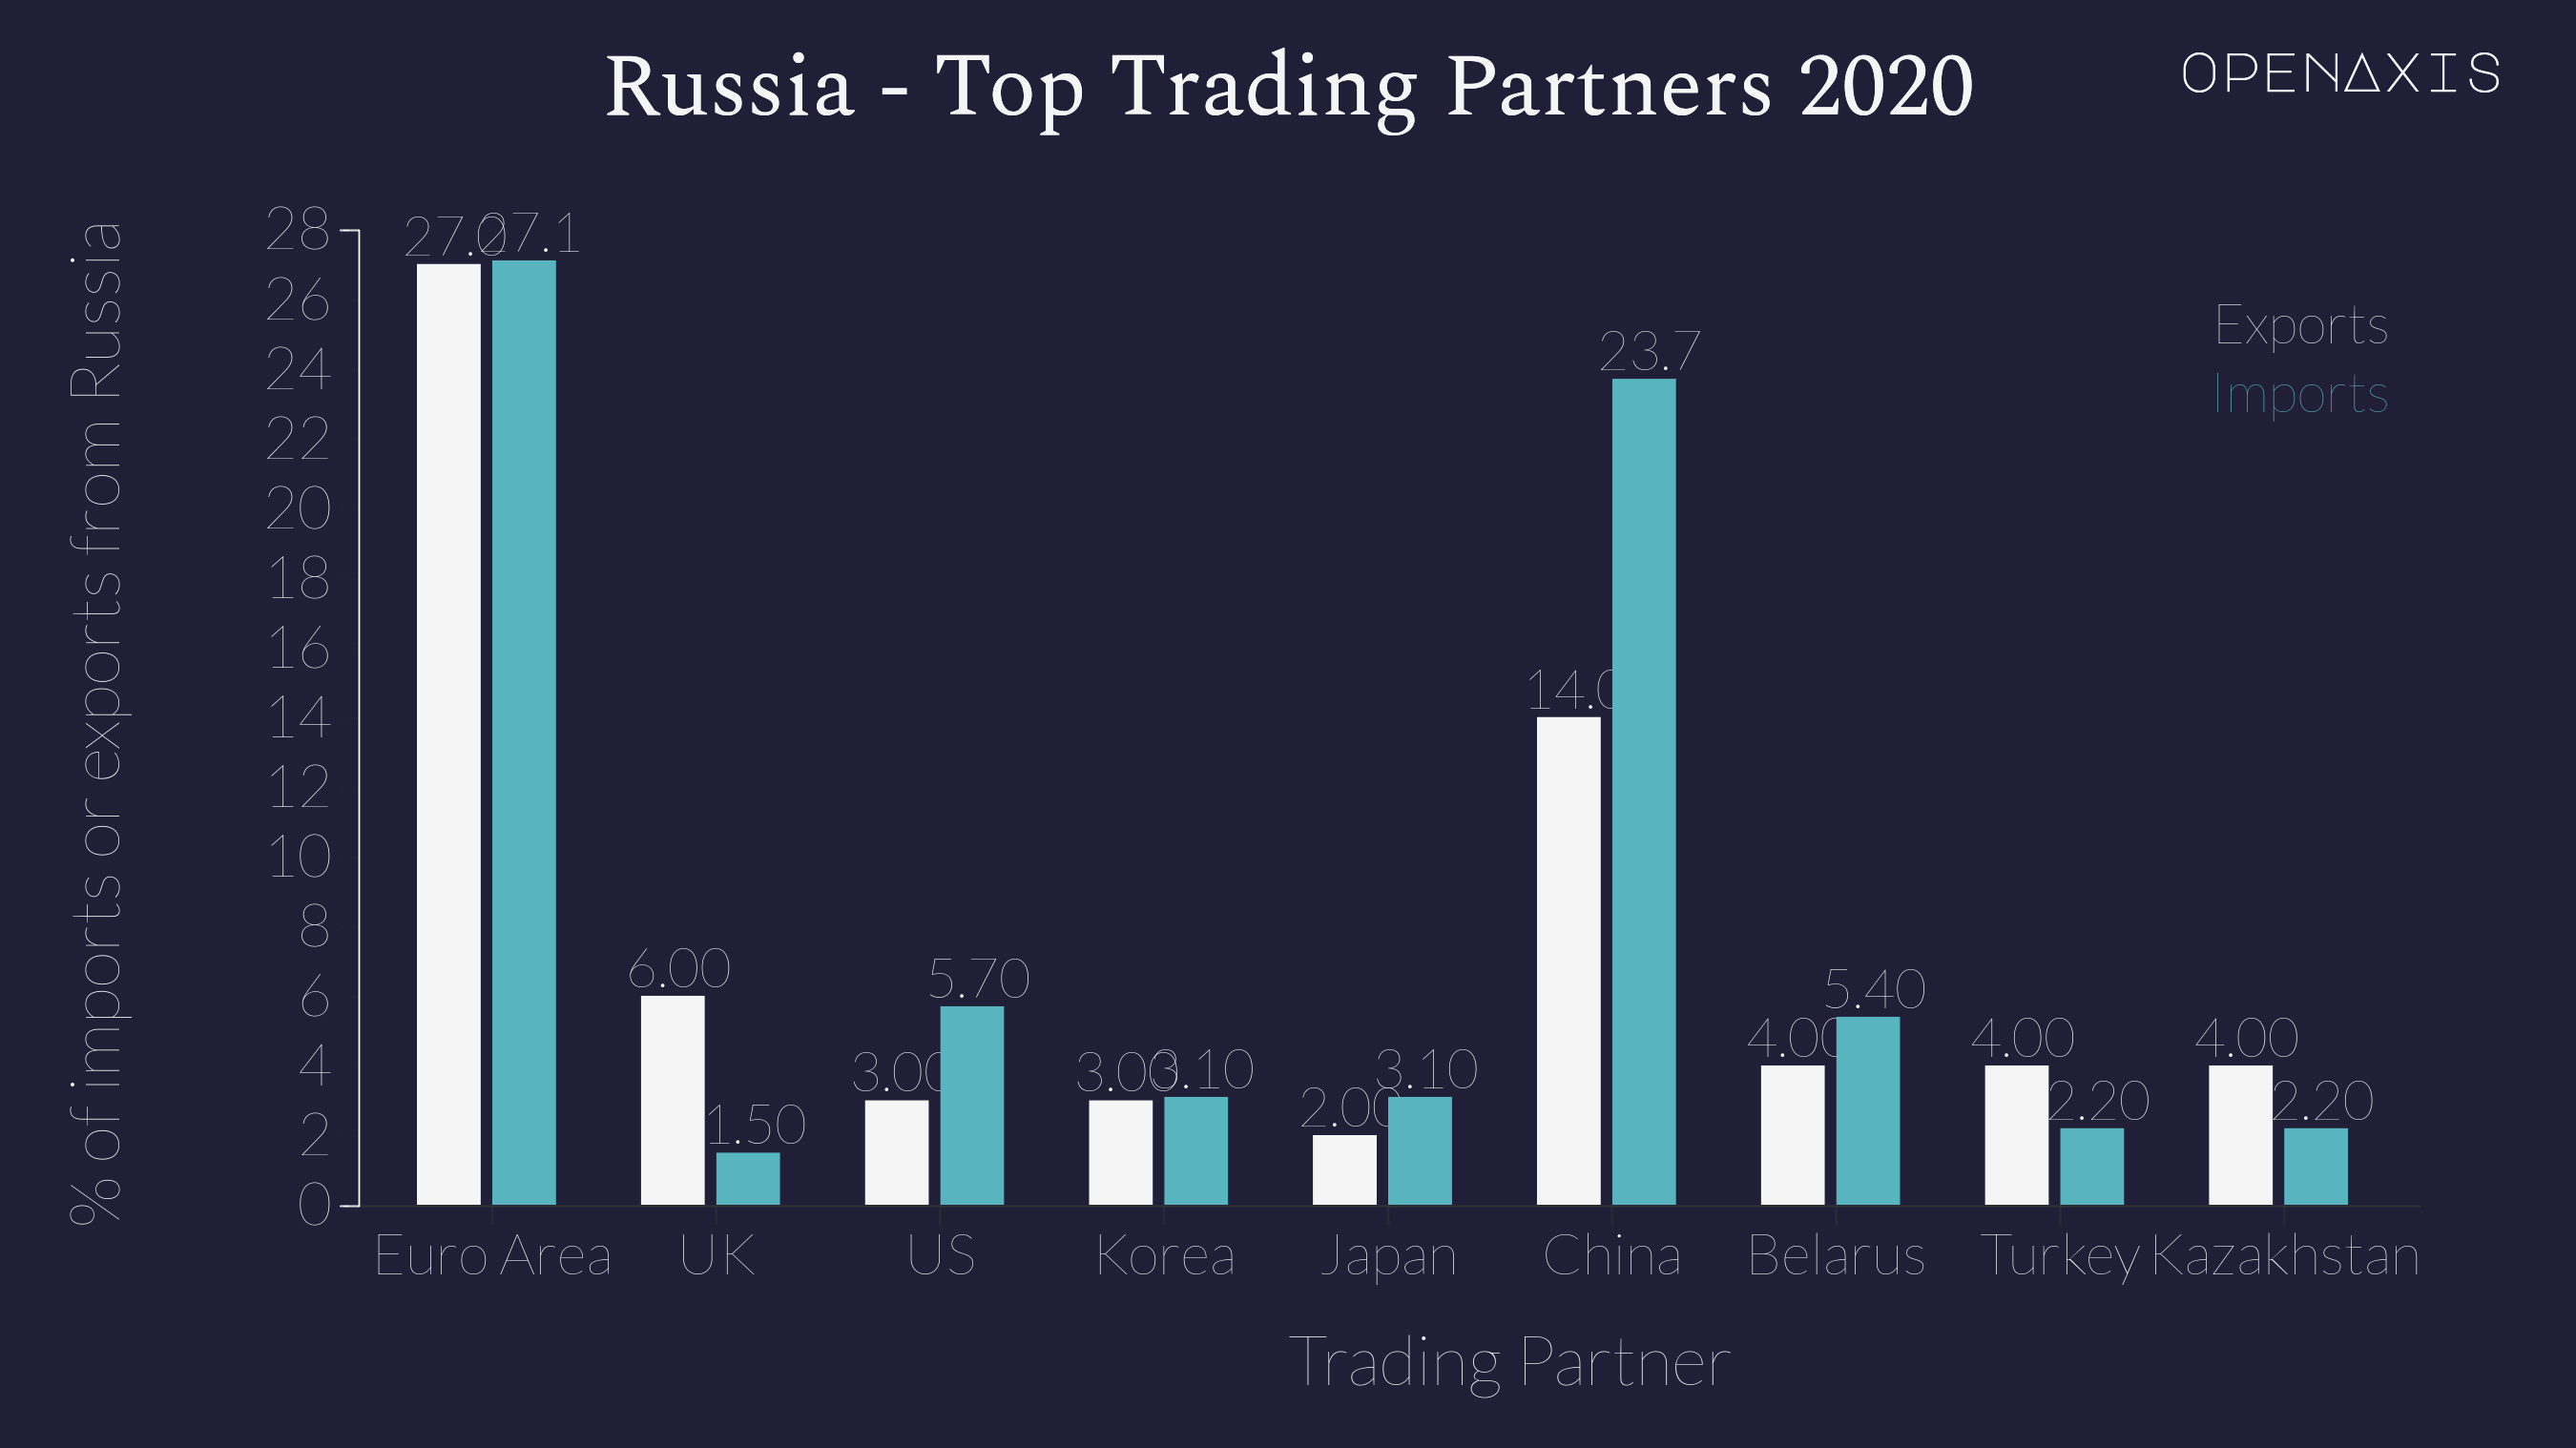 "Russia - Top Trading Partners 2020"